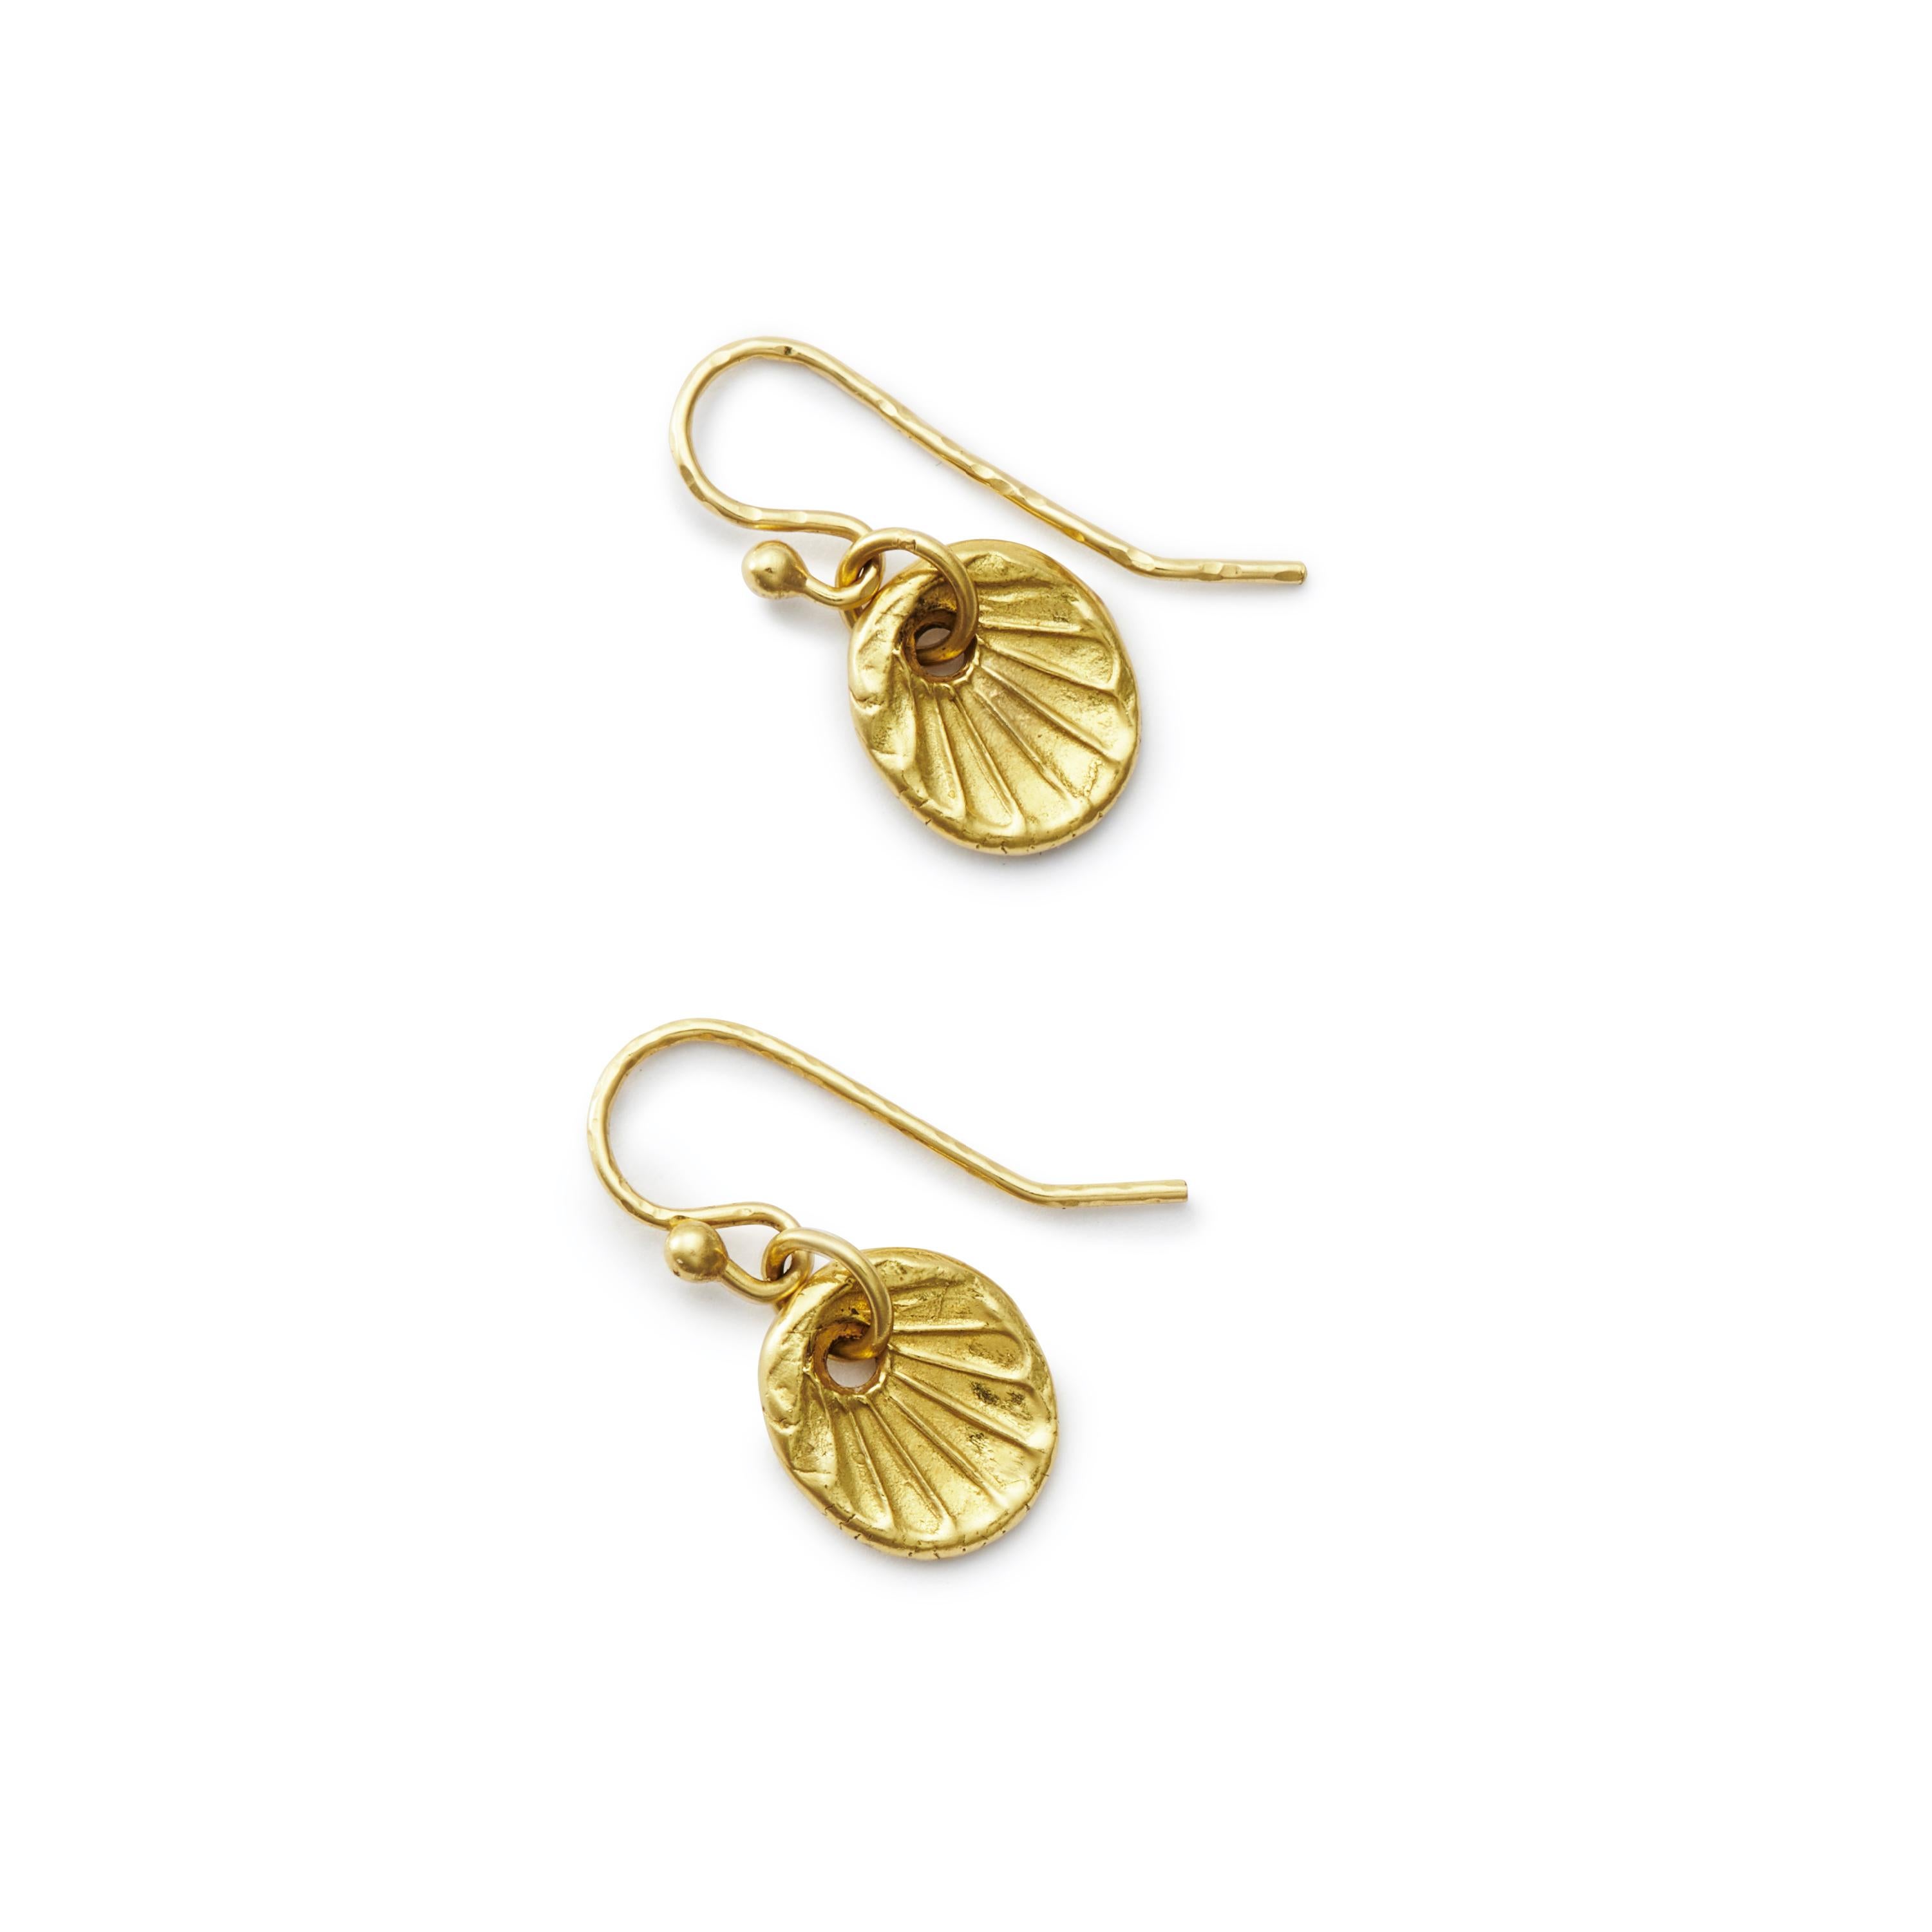 These delicate and detailed 18 Karat Gold Scallop Shell drop earrings make a lovely gift for you or someone special. French wires.